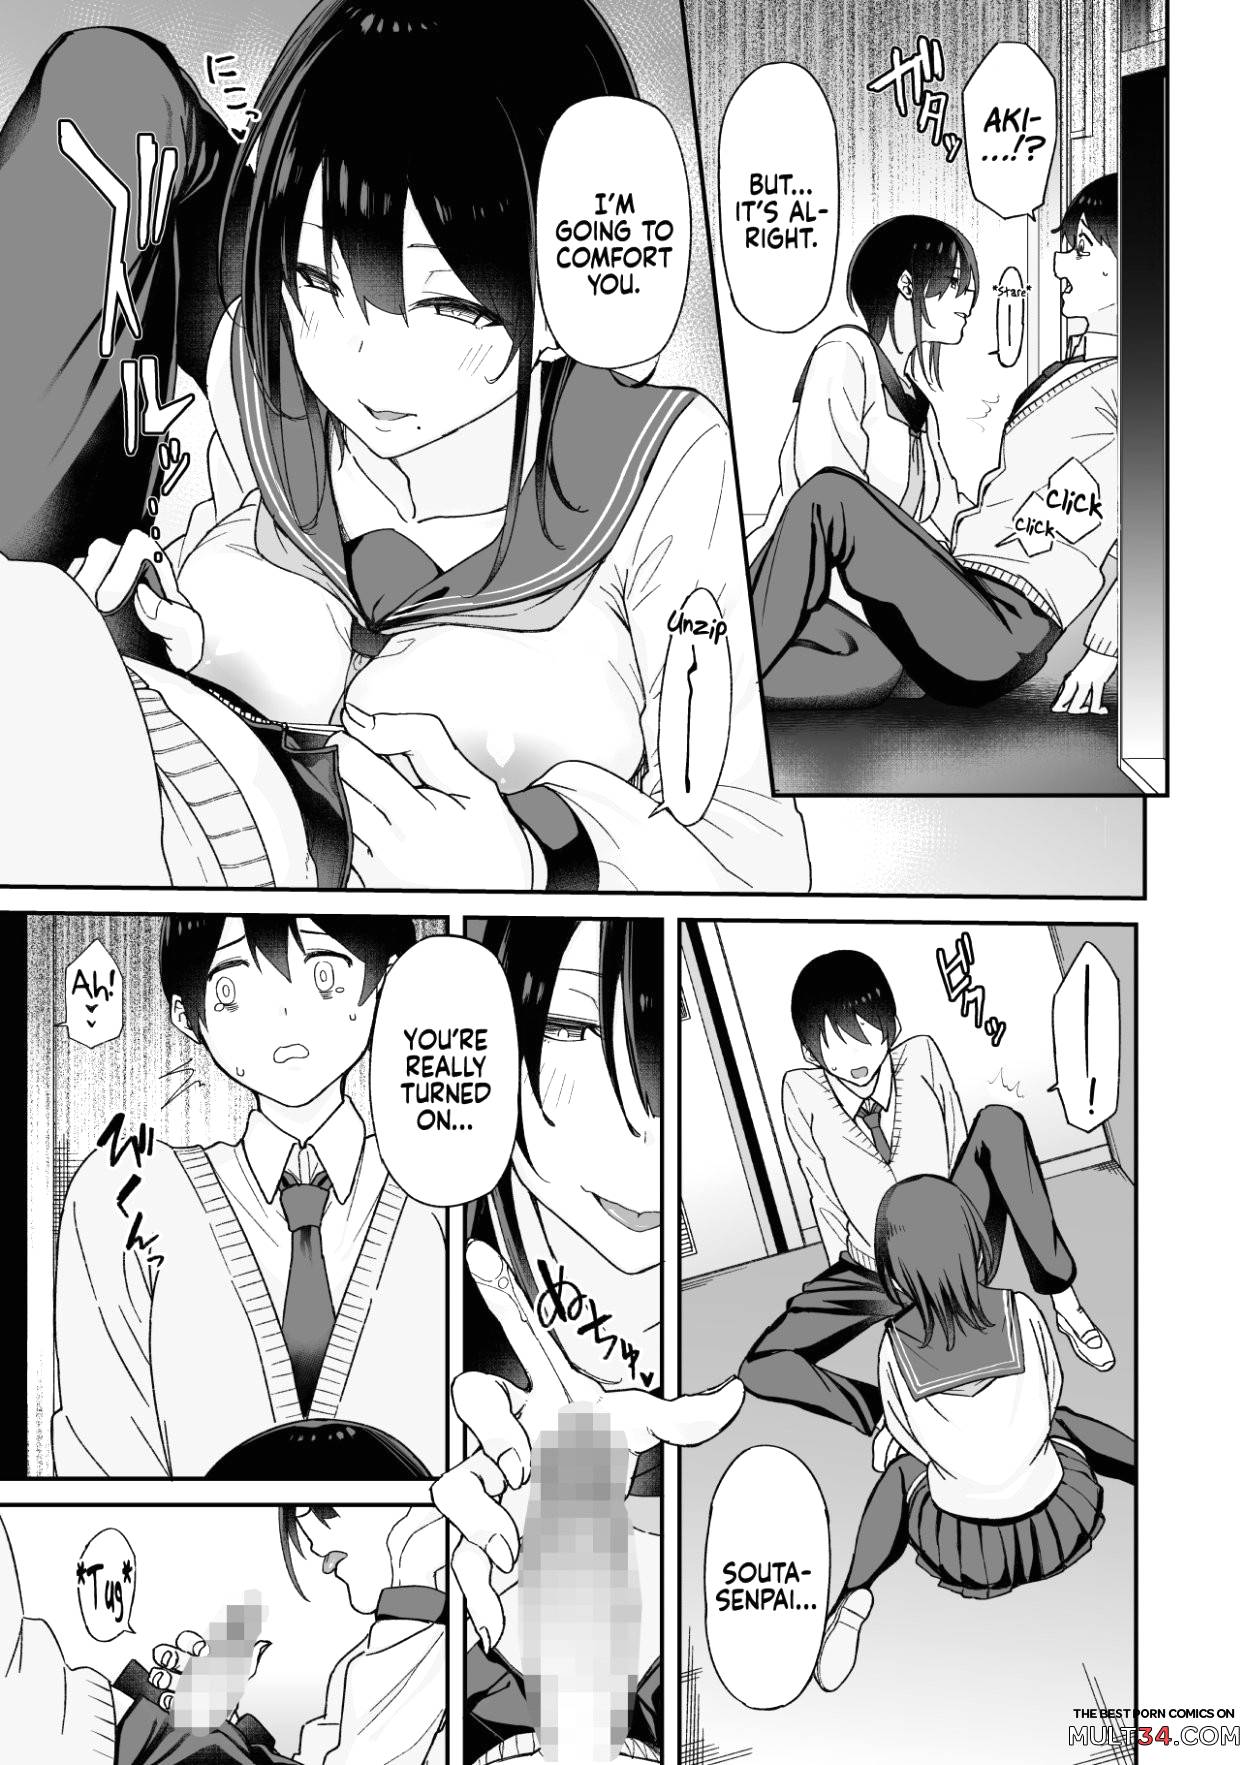 Because my Older Childhood Friend was Taken Away from Me, is it Ok for Me to Have Sex with Her Little Sister? page 14